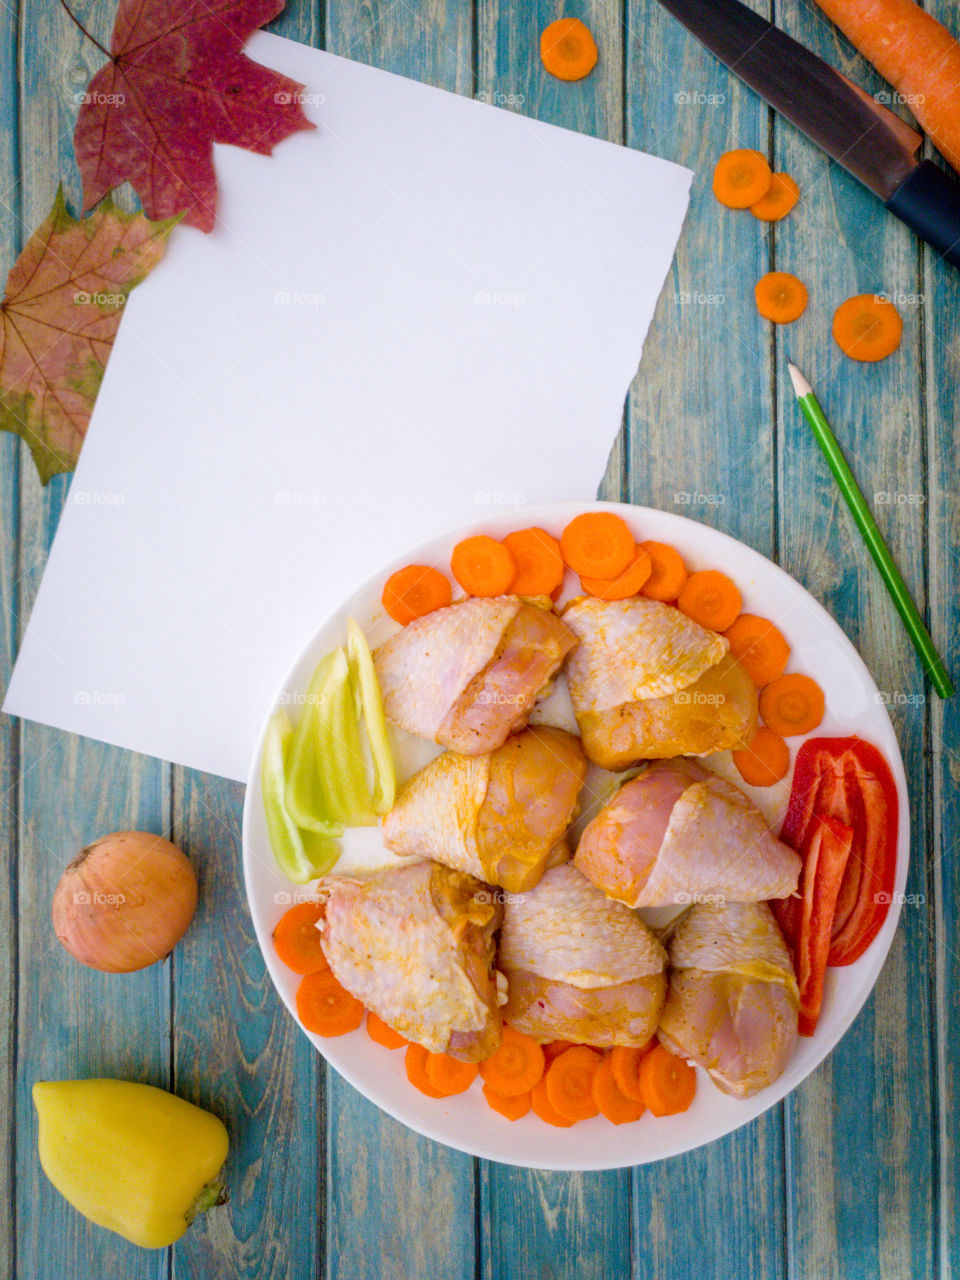 Pickled chicken legs with slices of carrots and green and red bell peppers on a white plate with a sheet of white paper for the recipe and a pencil on a wooden background.  Ingredients for the preparation of grilled chicken with vegetables.